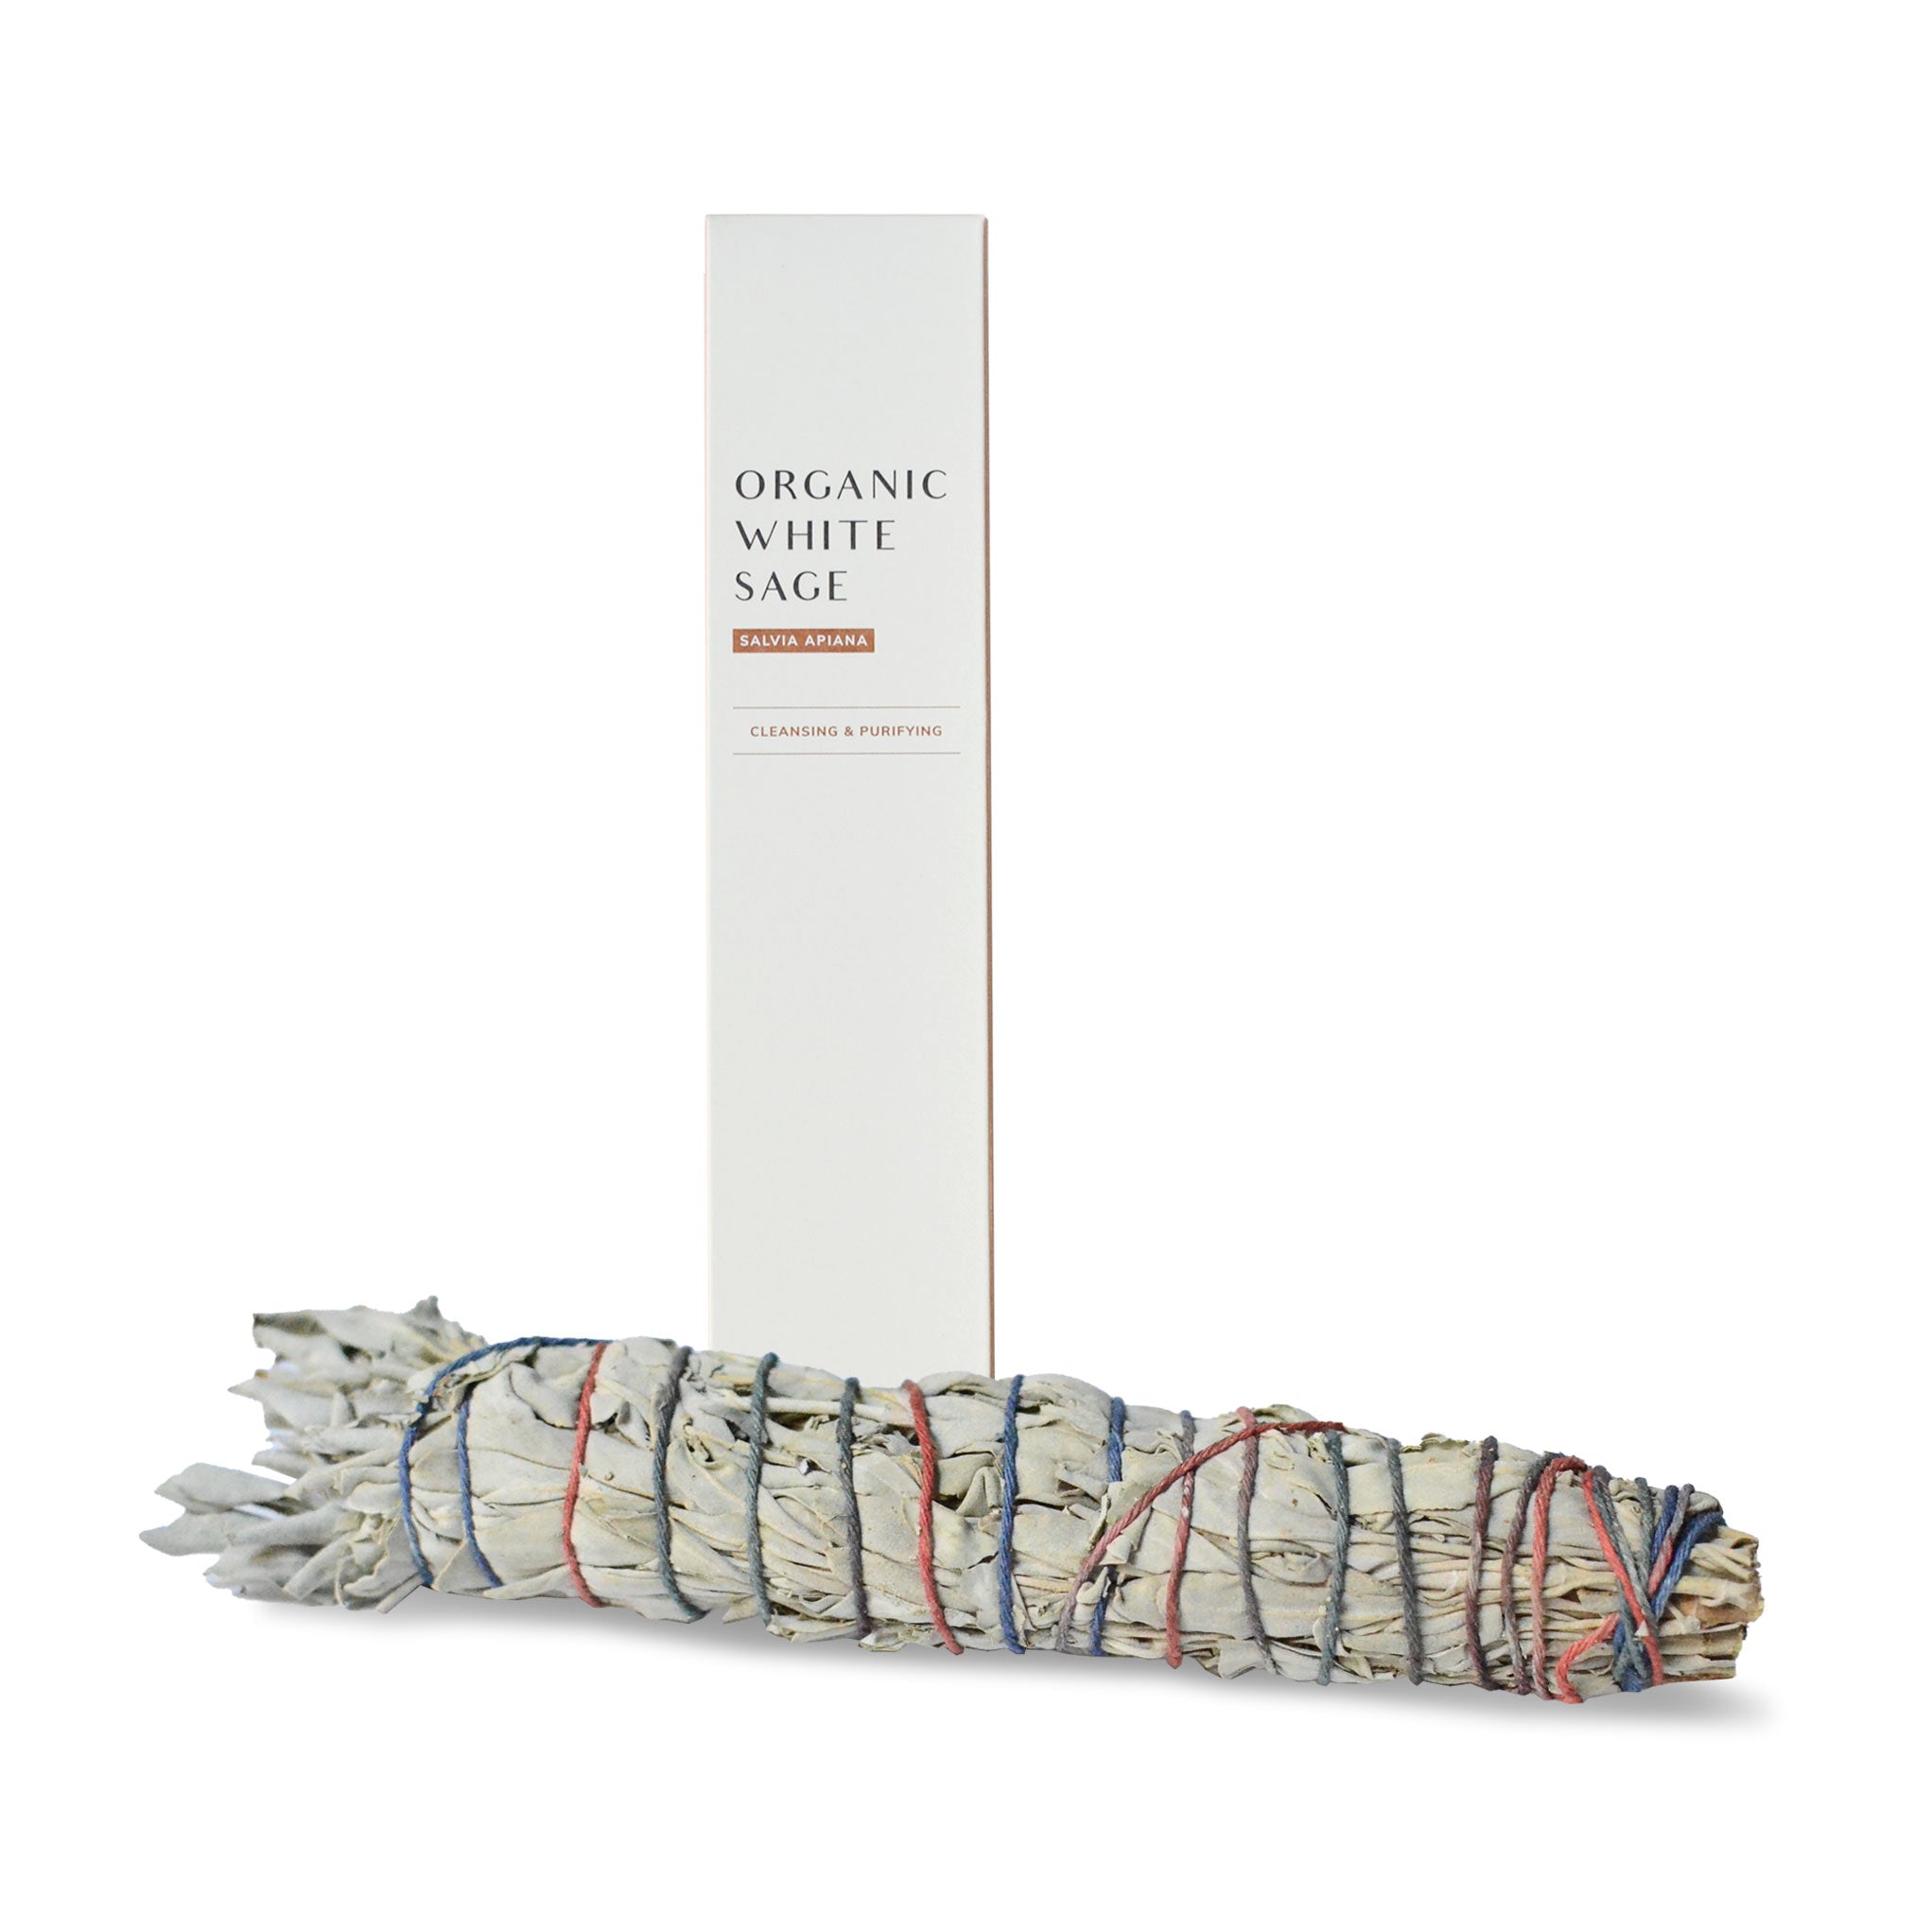 Large white sage smudge stick and a package at the back.